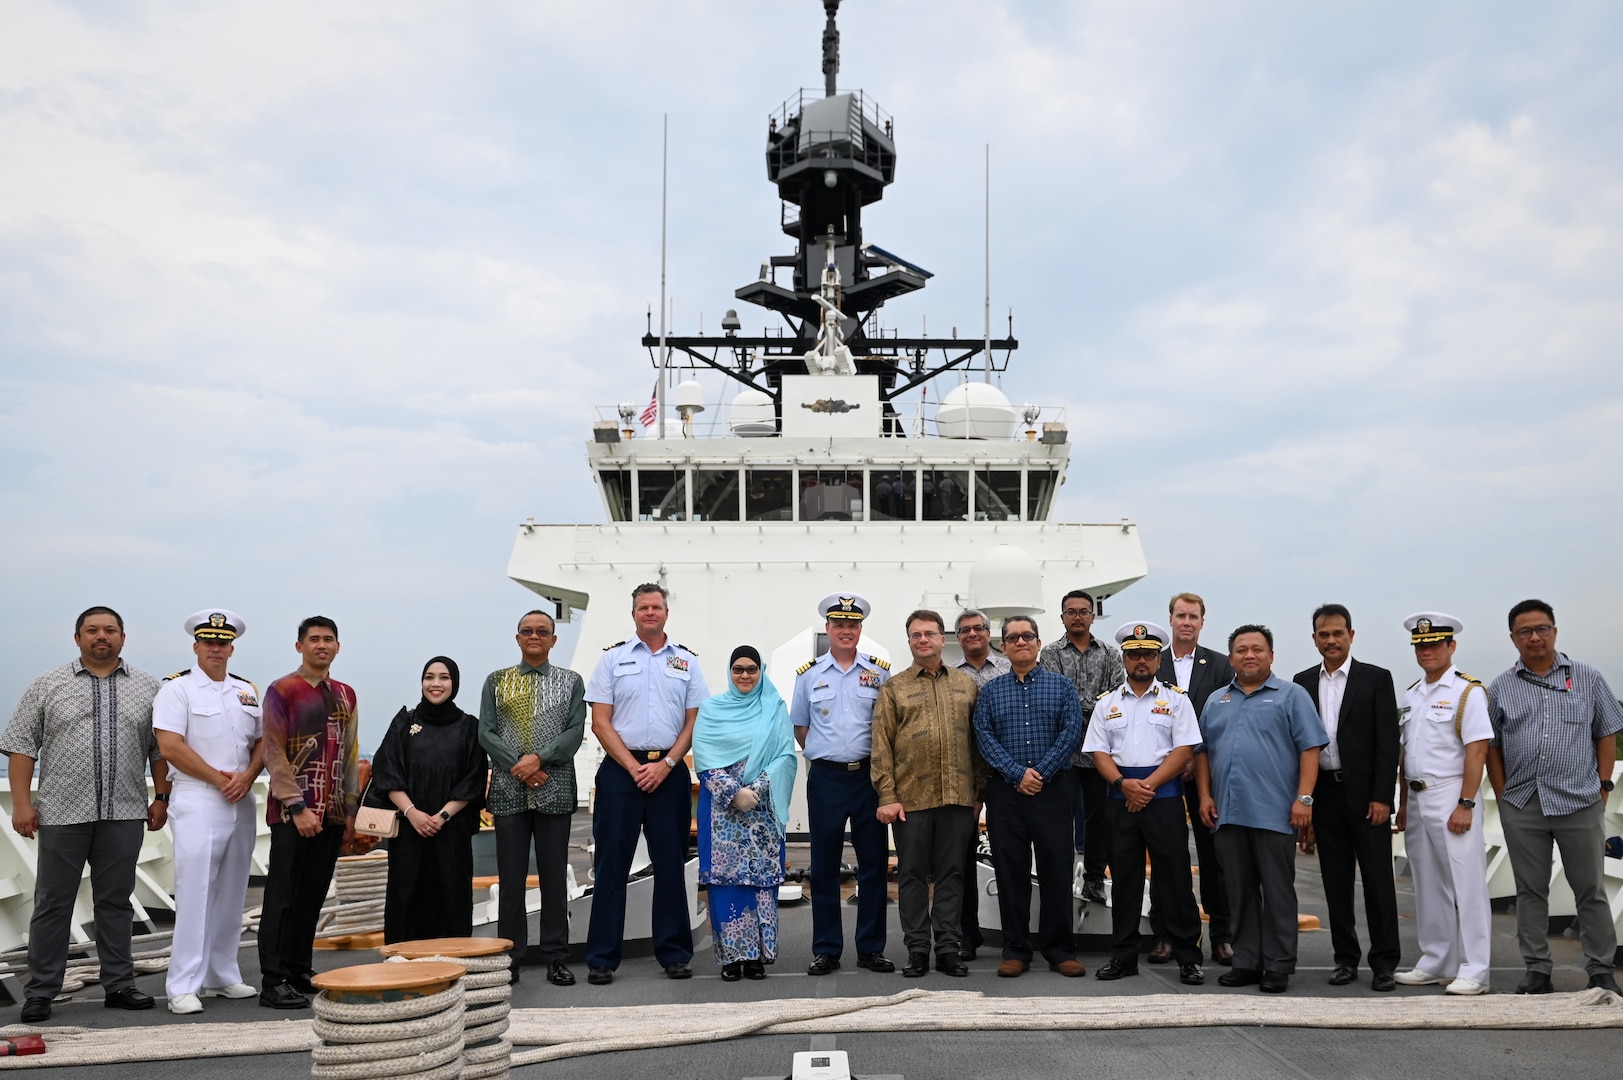 Dignitaries from multiple Malaysian government agencies, as well as members of the U.S. Navy and U.S. Coast Guard, pose for a photo at the bow of U.S. Coast Guard Cutter Bertholf (WMSL 750), while the cutter made a port call in Port Klang, Malaysia, March 2, 2024. This marked the first time a U.S. Coast Guard vessel called on Port Klang for a visit. (U.S. Coast Guard photo by Petty Officer Steve Strohmaier)